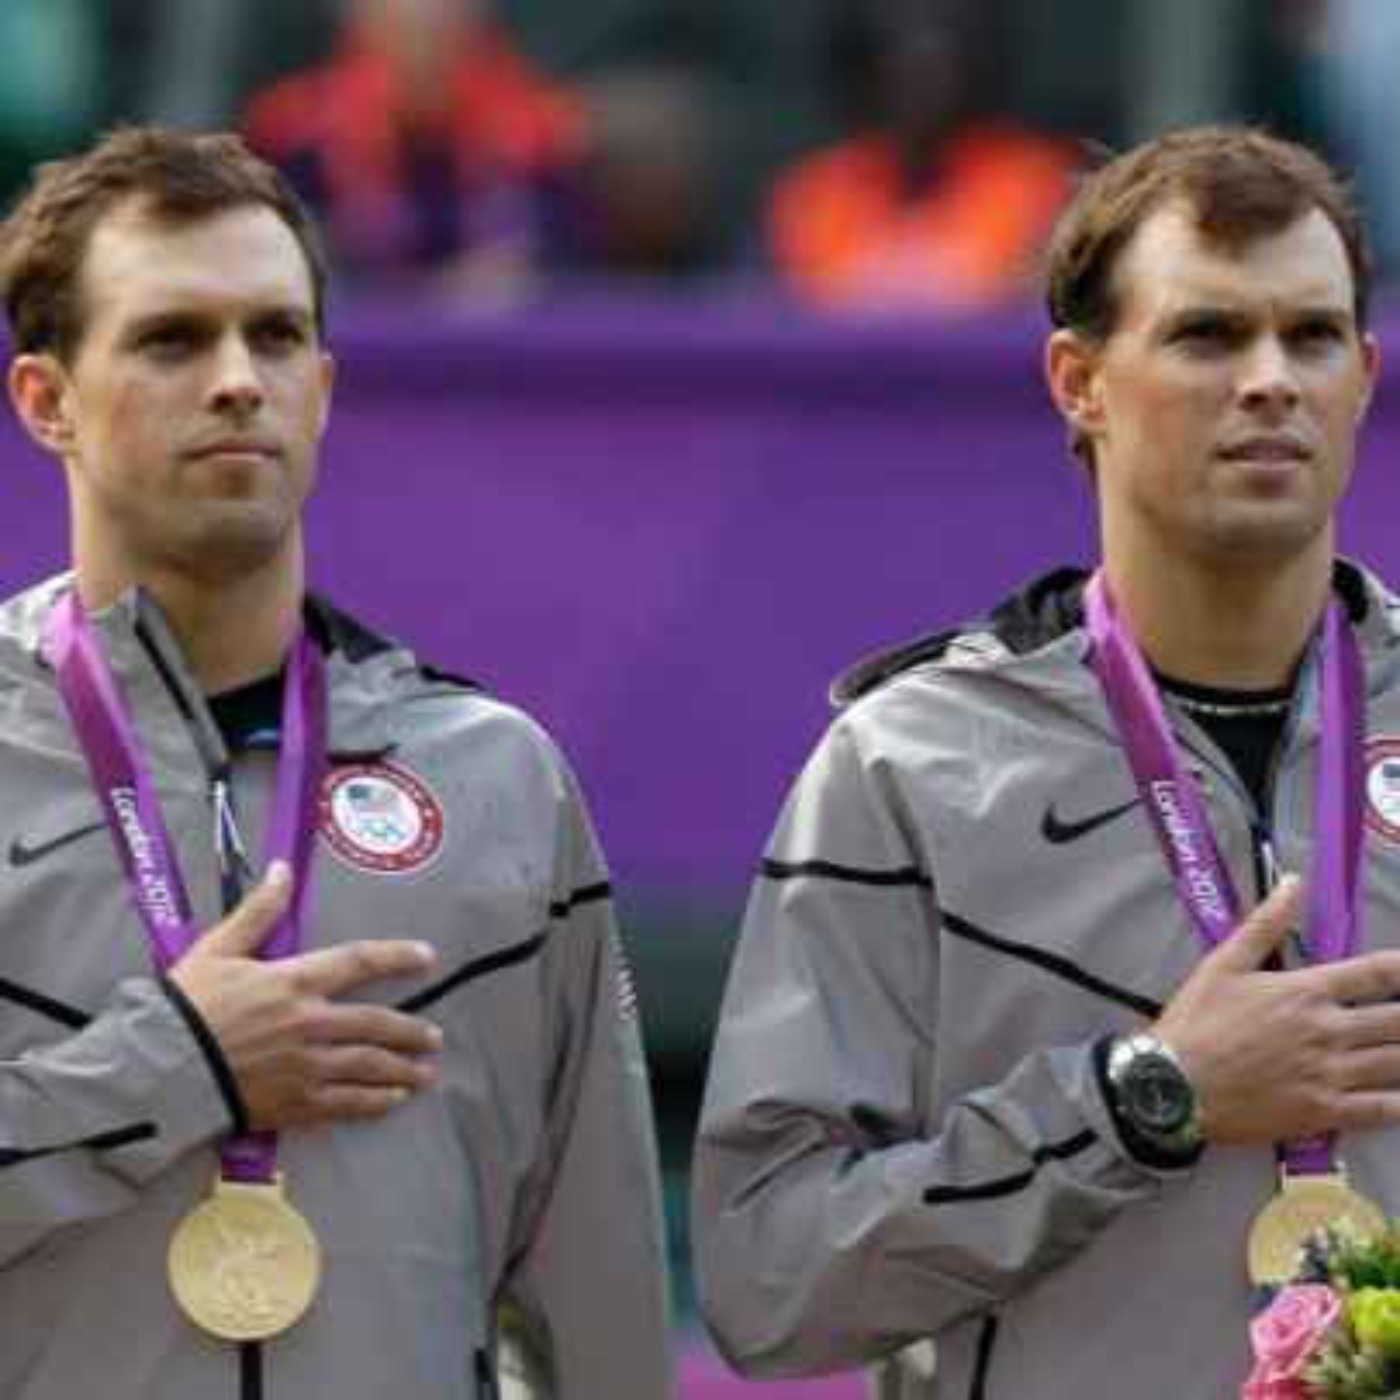 THE BRYAN BROTHERS